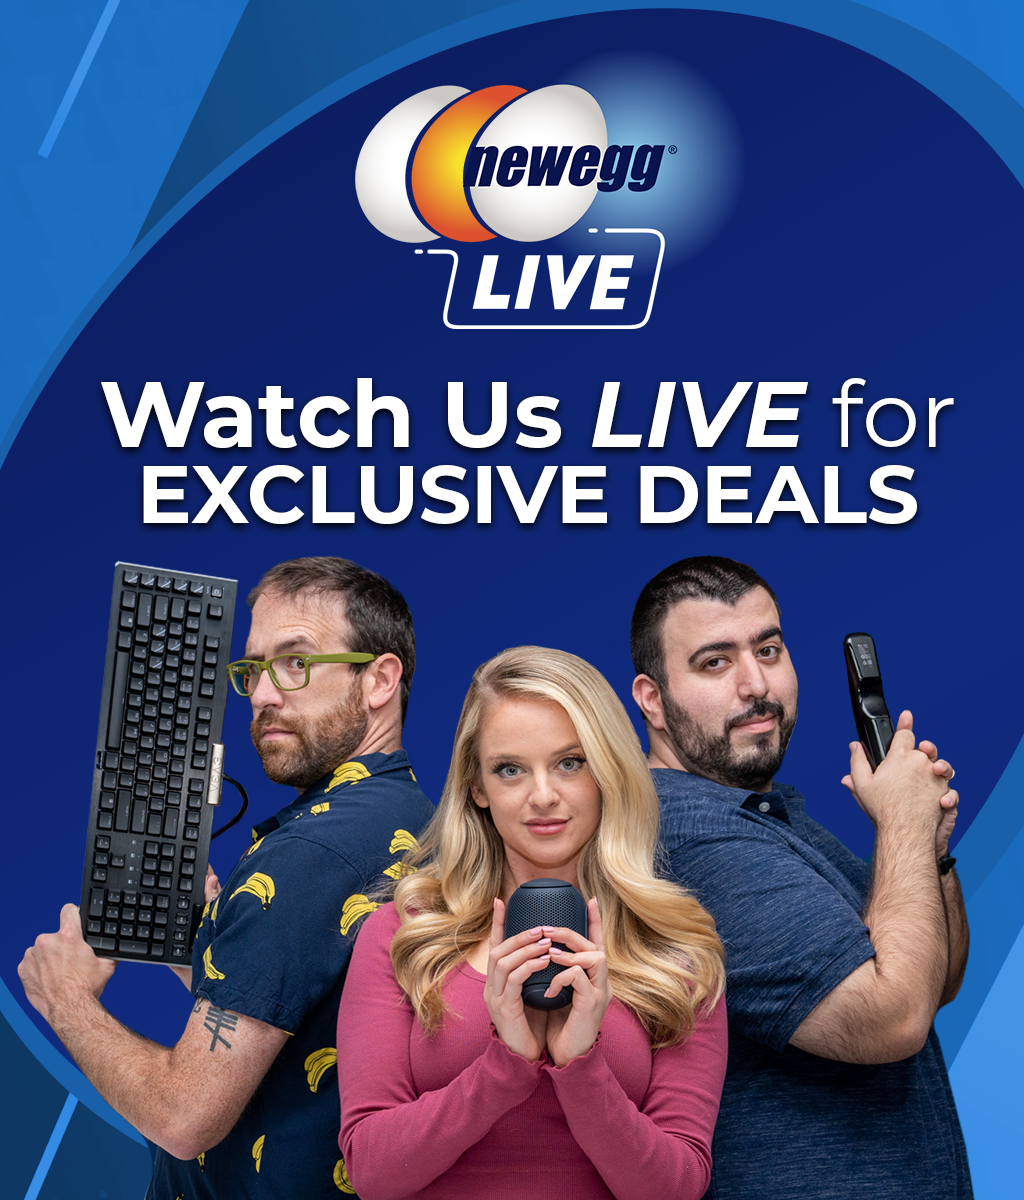 Newegg Live! Humpday deals with Boston Tom. Shop deals now!